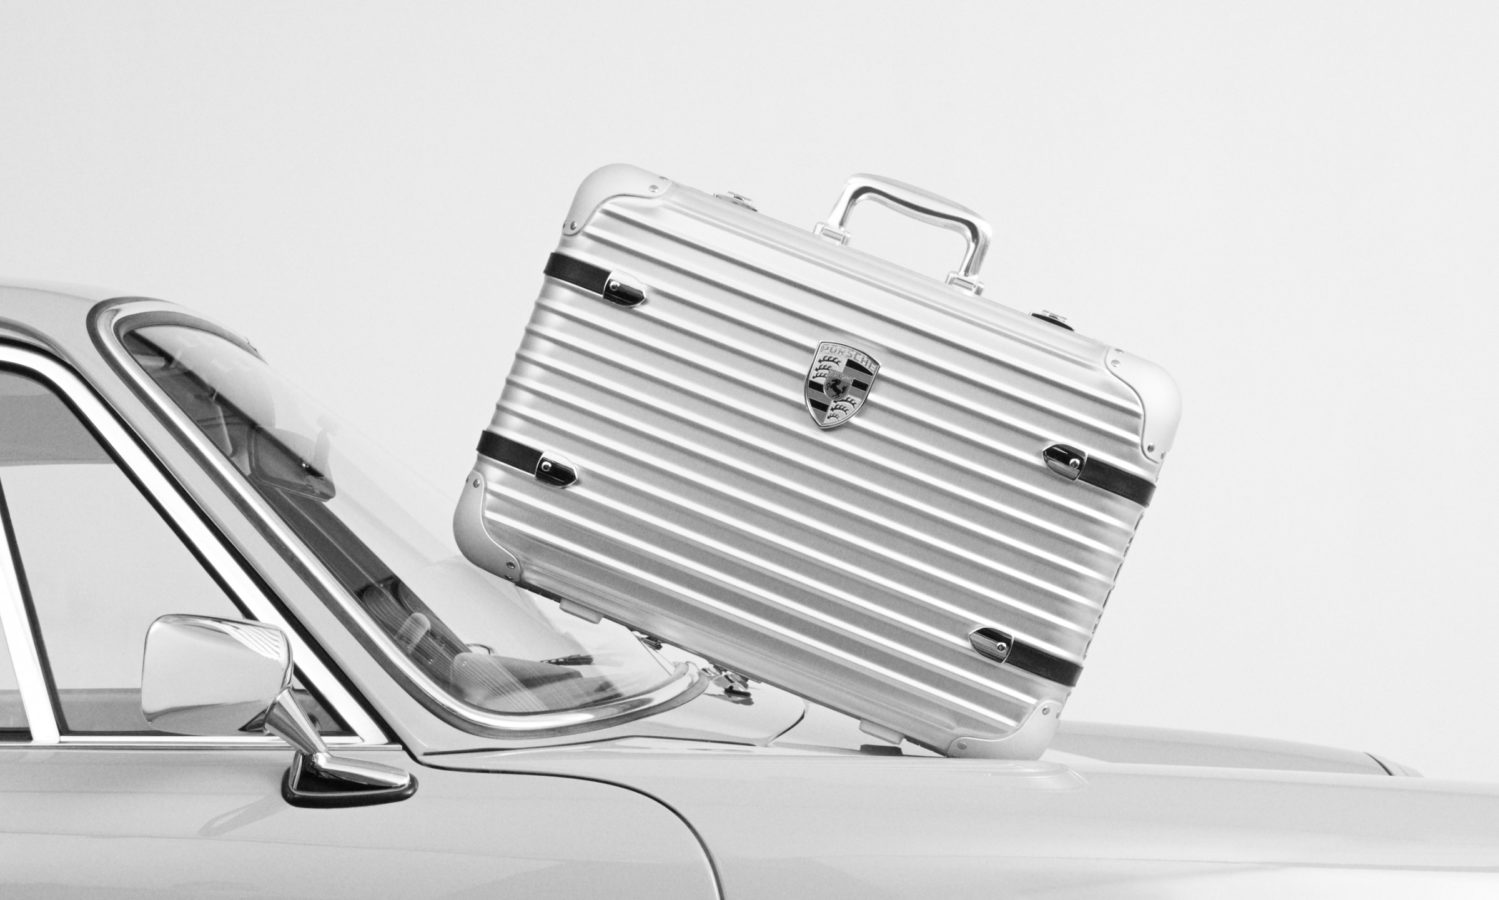 Rimowa x Porsche’s new limited edition collector’s case is inspired by the legendary 911